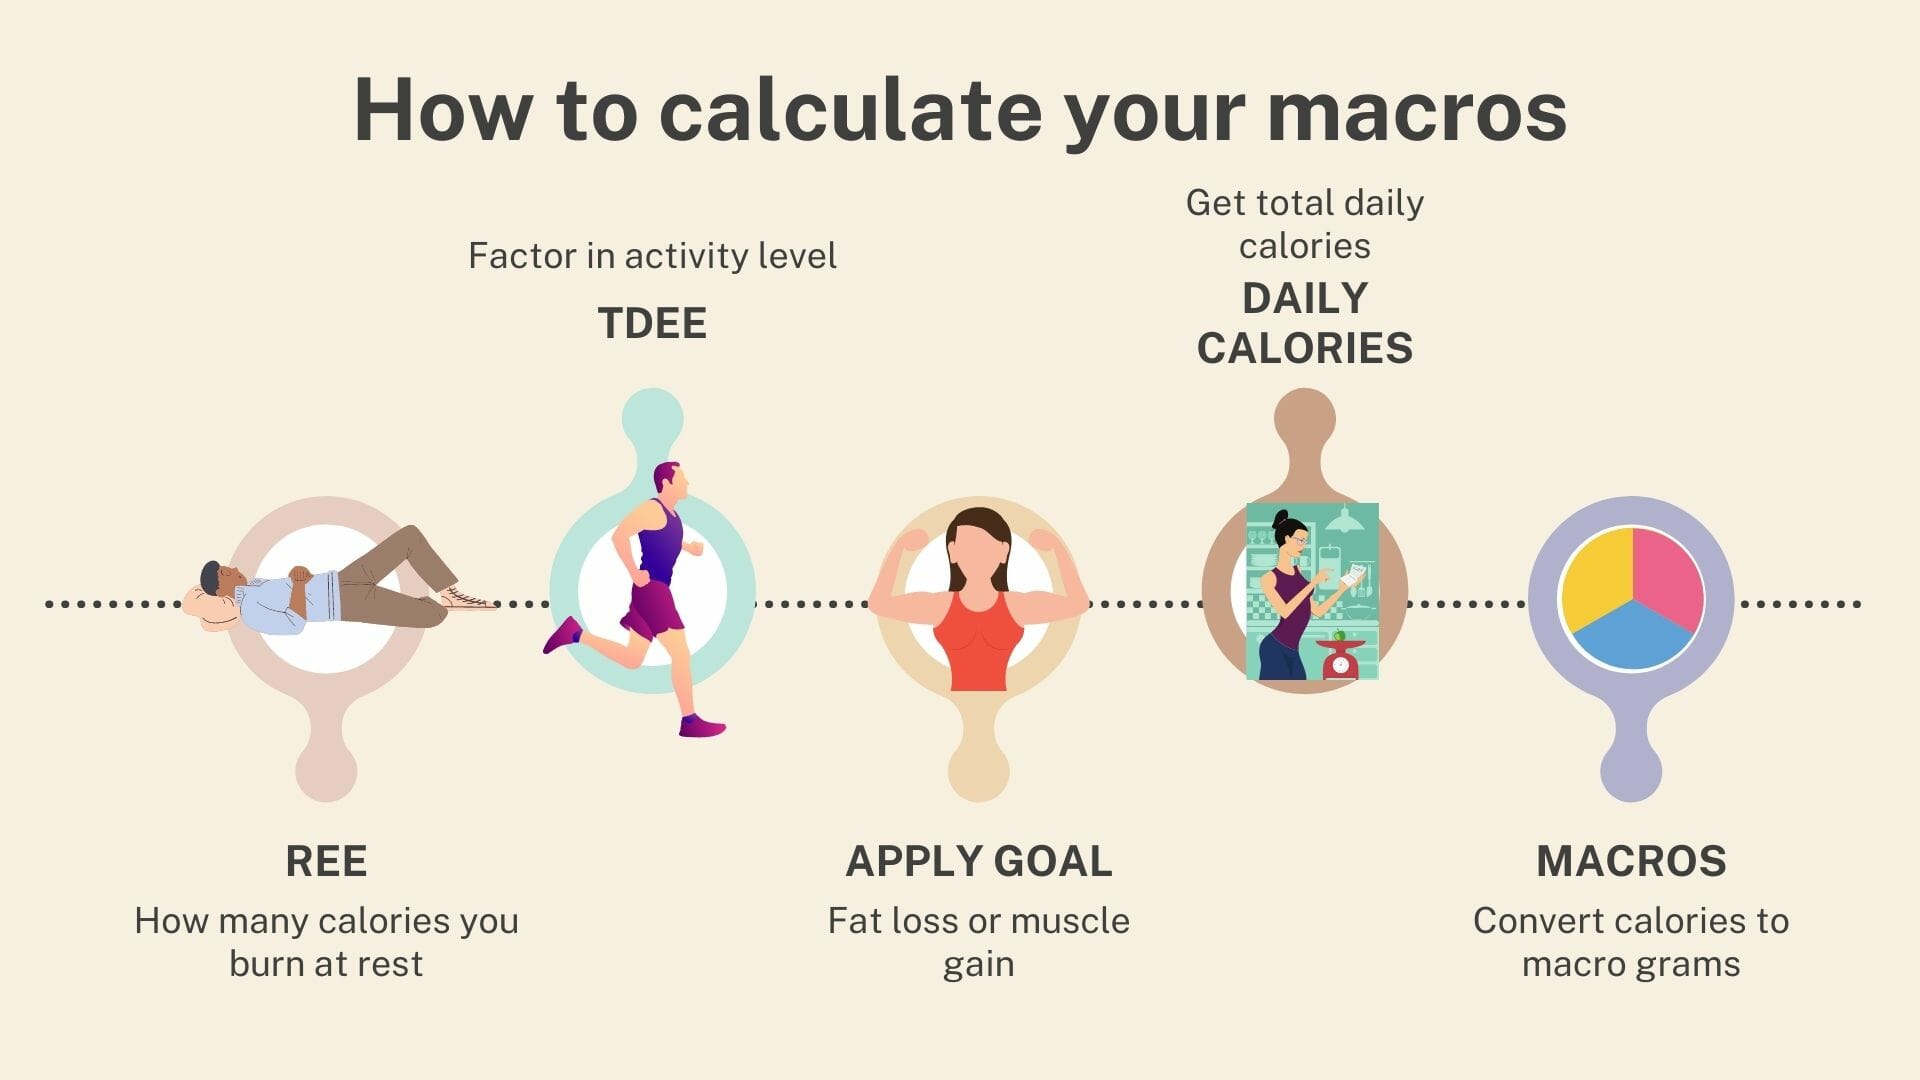 https://healthyeater.com/wp-content/uploads/2021/04/How-to-calculate-your-macros.jpg